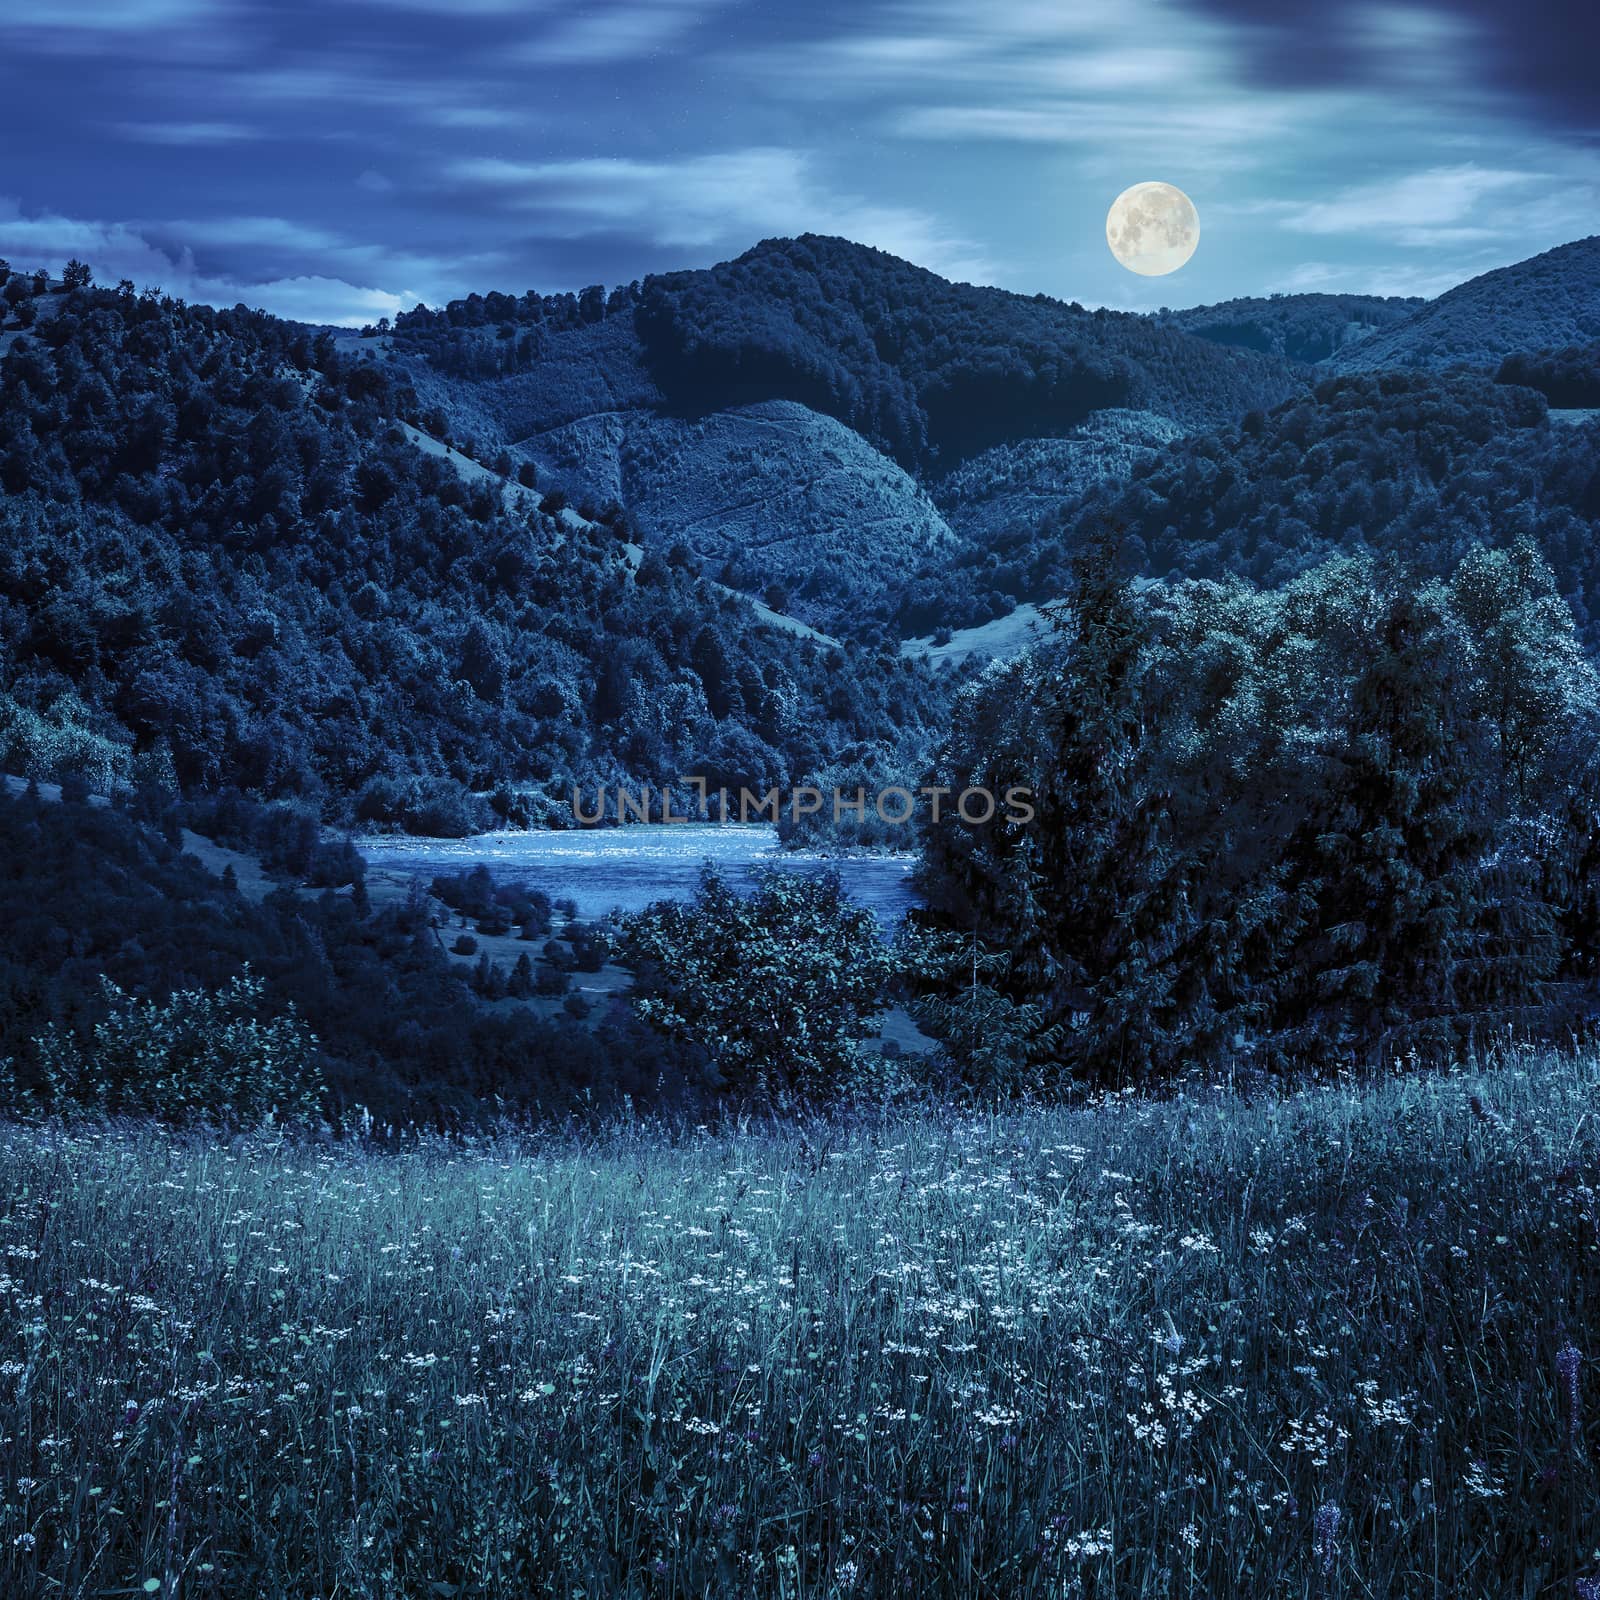 composite mountain summer landscape. pine trees on hillside meadow with wild flowers near the river in mountains at night in full moon light